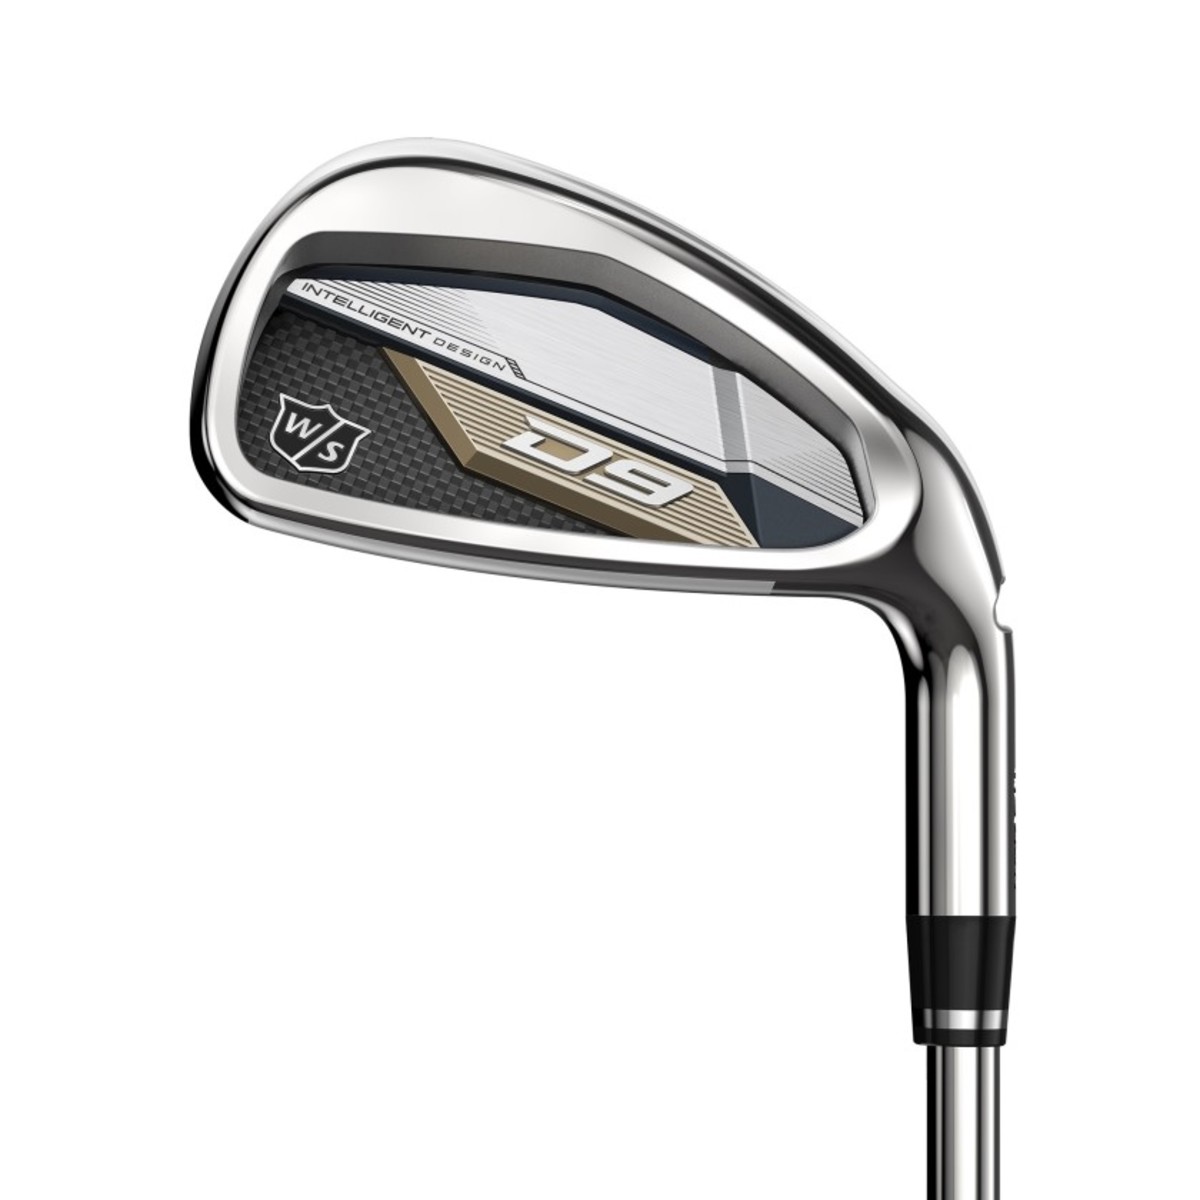 The D9 irons feature urethane-filled power holes that are positioned so that the club face can flex better at the point of impact, which translates into maximum ball speeds and distance.